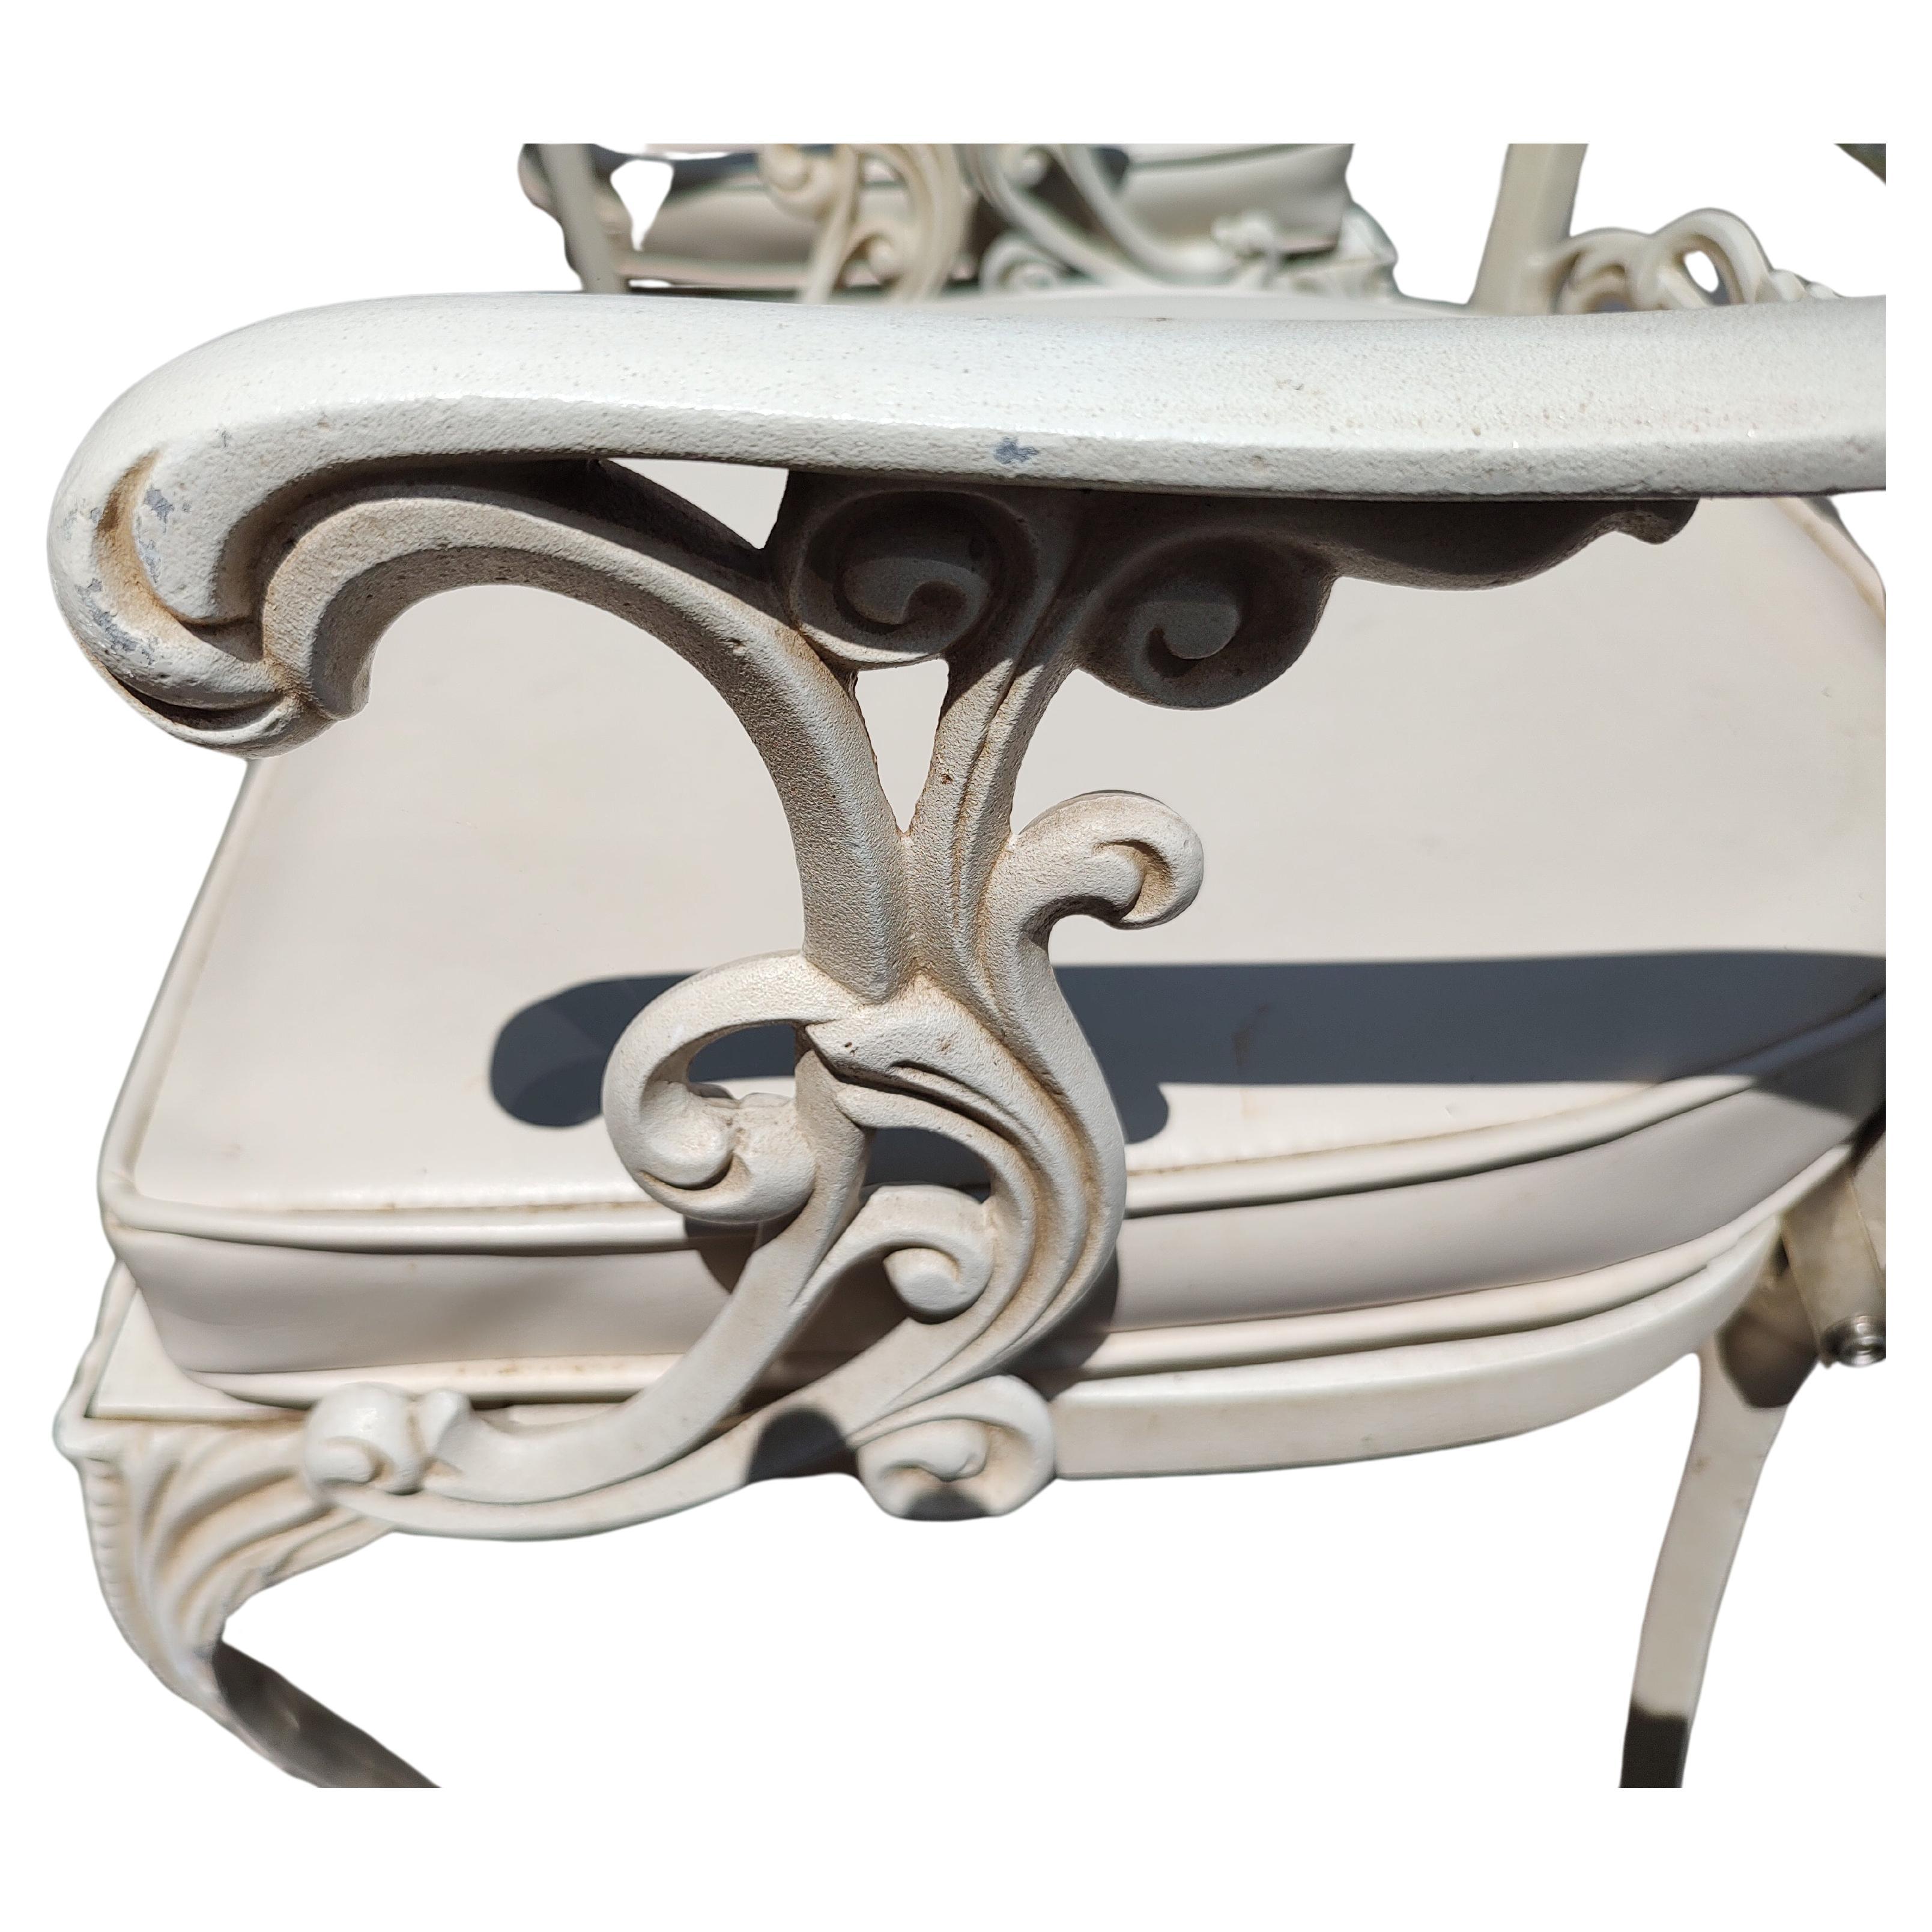 Classic fabulous indoor outdoor patio set in cast aluminum by Molla of Italy. Impeccable castings in aluminum and then powder coated. Ball and claw foot on front legs of the chairs where there is a double casting on the seat backs. All are armchairs